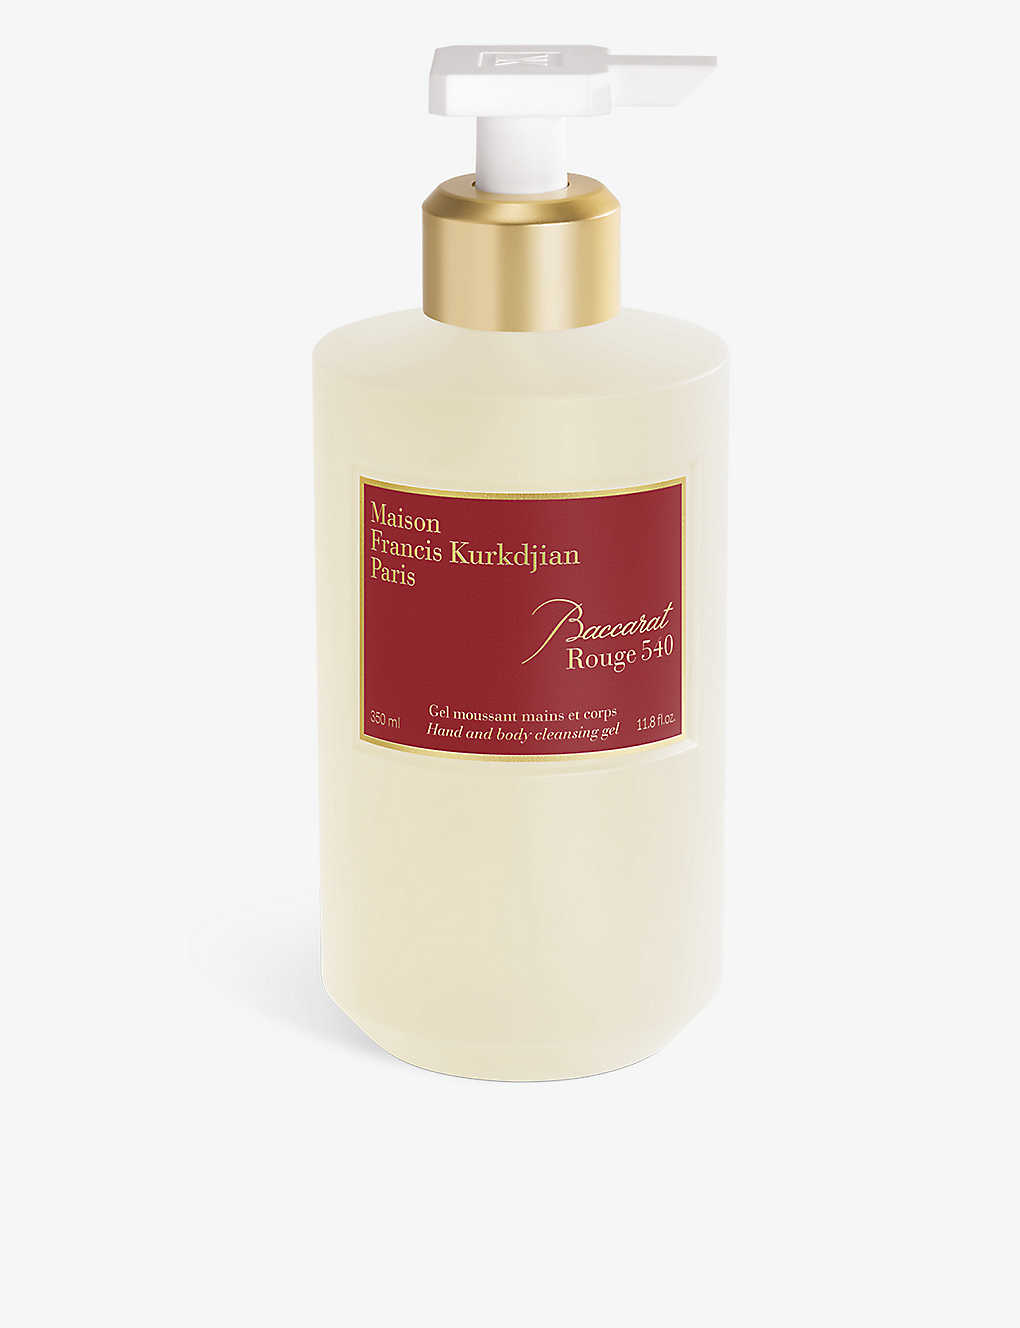 Maison Francis Kurkdjian Baccarat Rouge 540 Scented Hand And Body Cleansing Gel